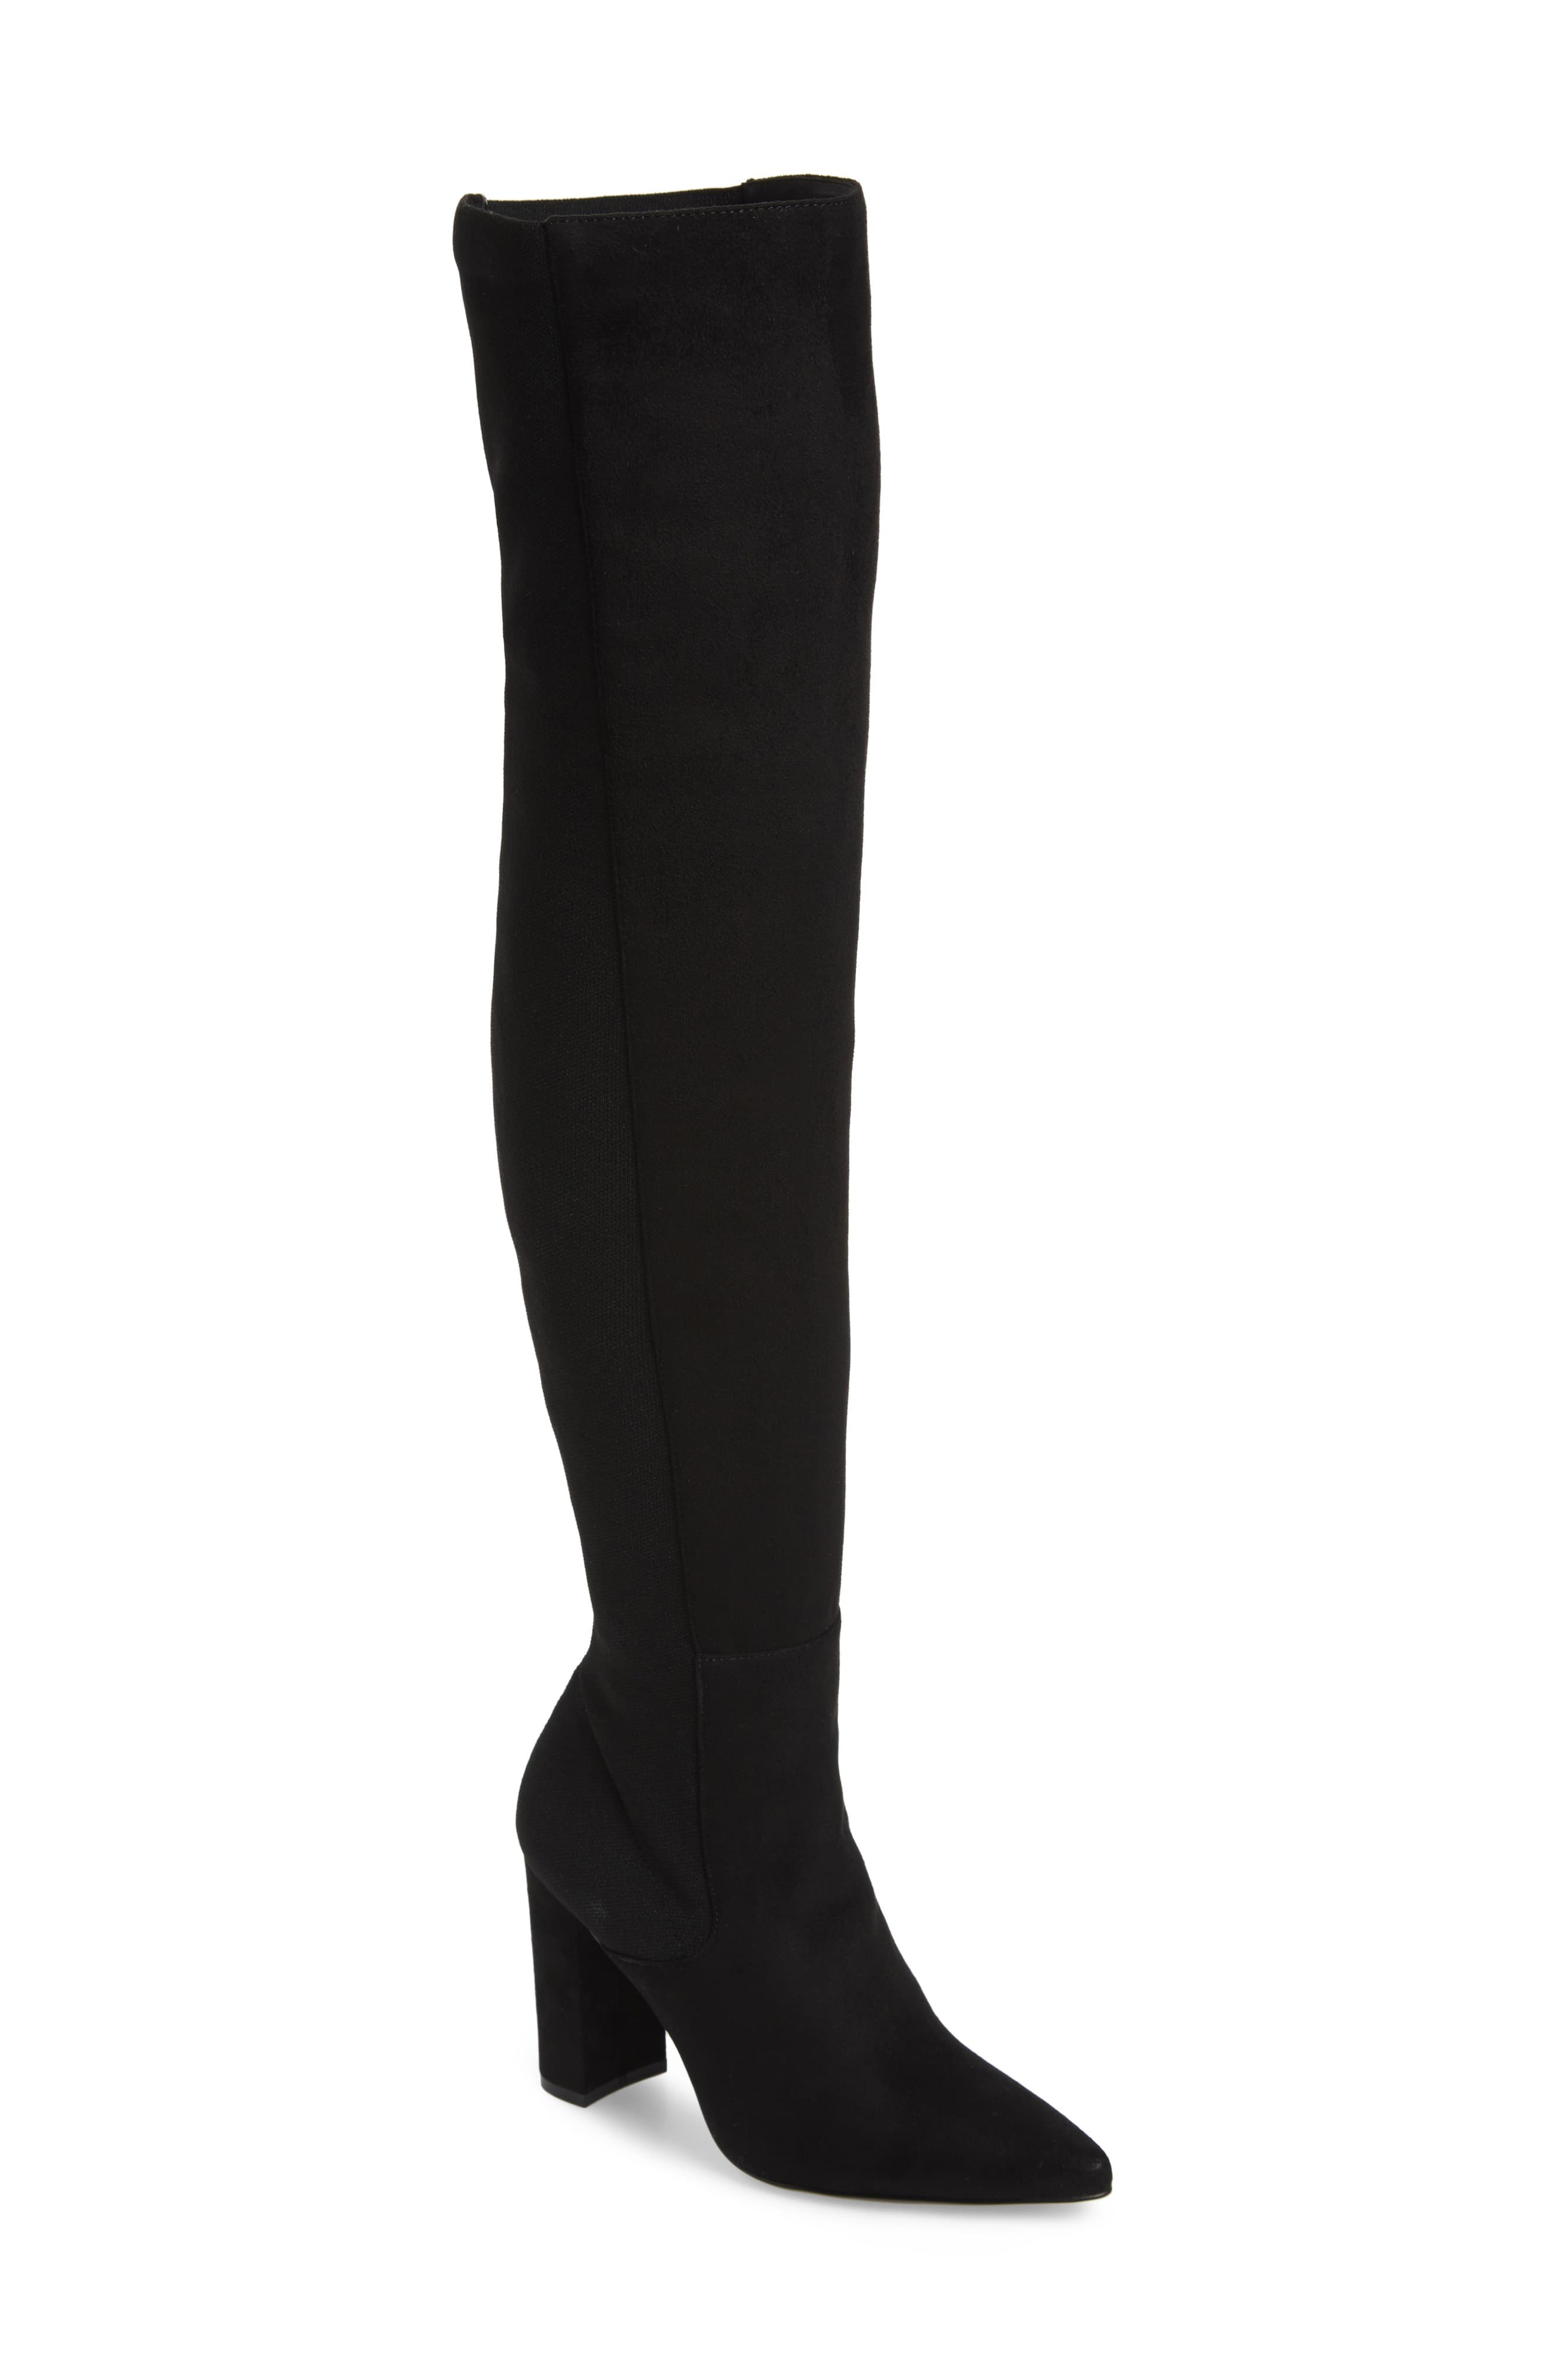 nordstrom black over the knee boots